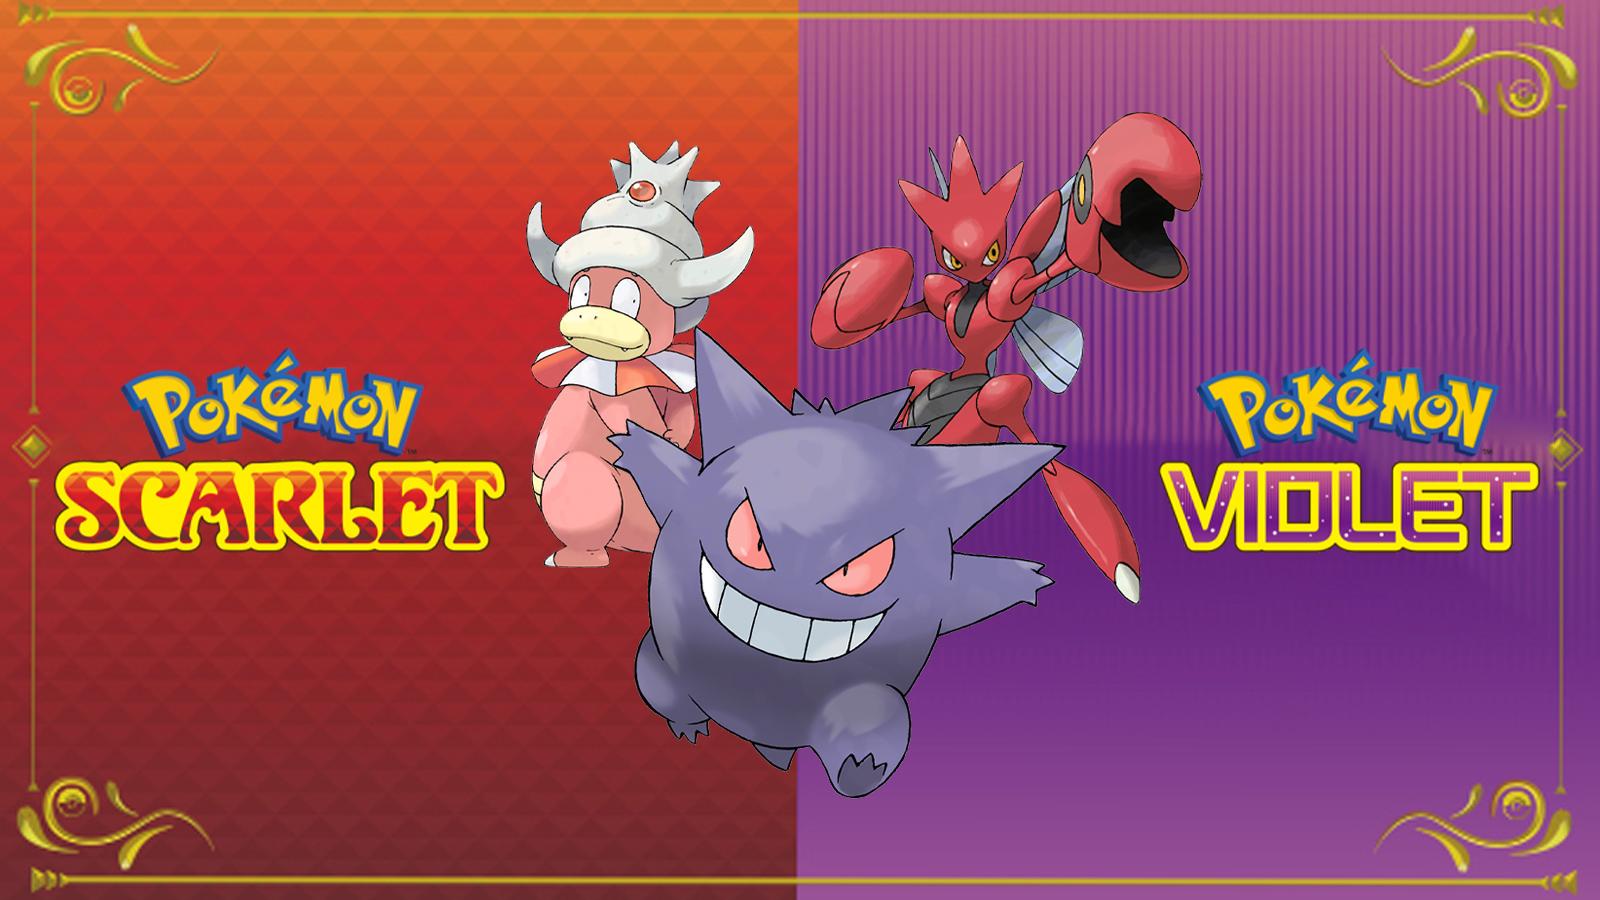 All Pokemon that evolve when traded in Pokemon Scarlet and Violet